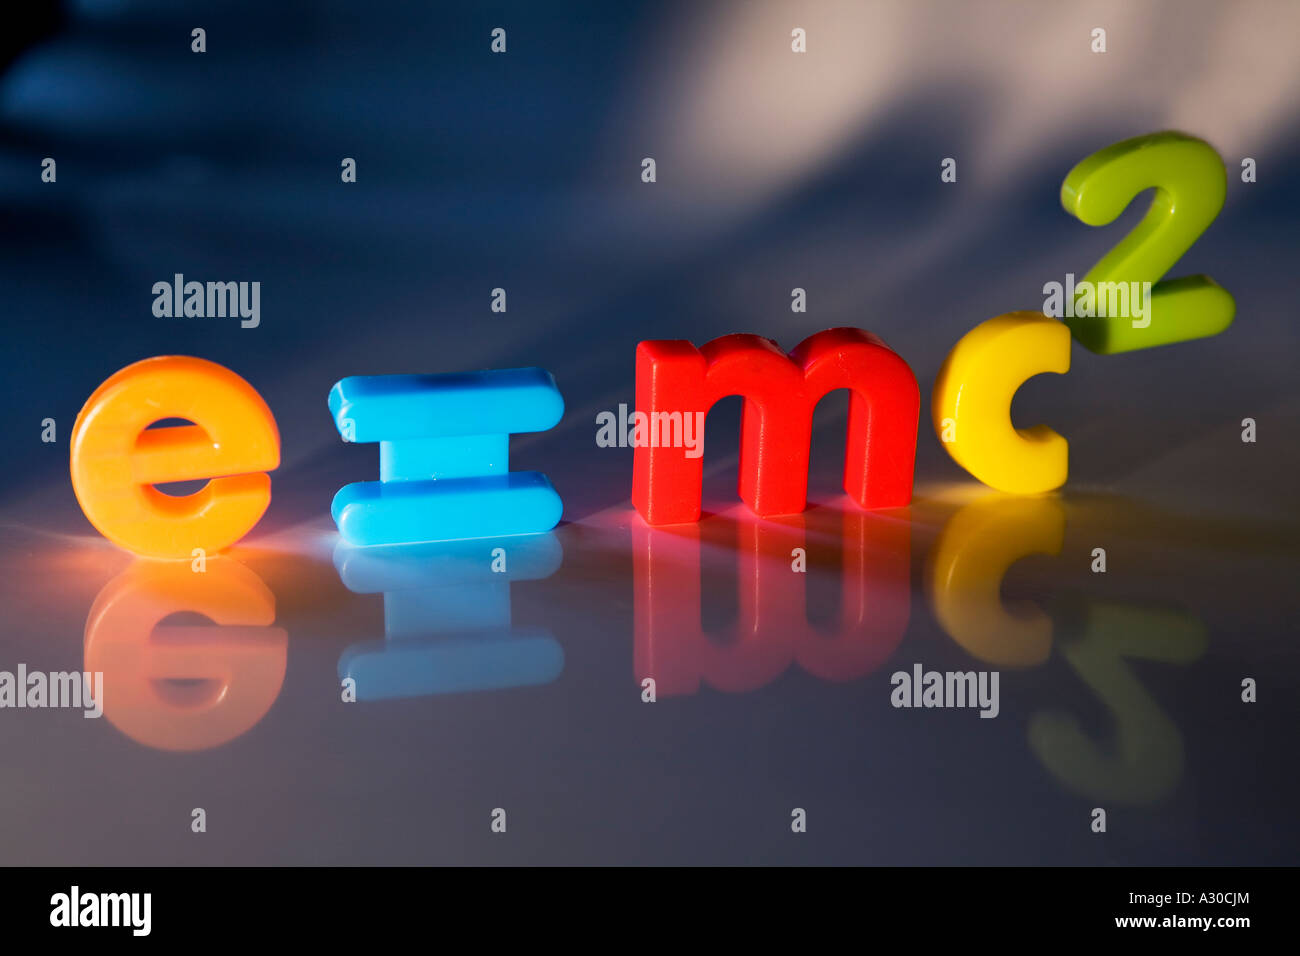 e mc2 theory of relativity formula spelt out with childrens fridge magnet letters and numbers Stock Photo